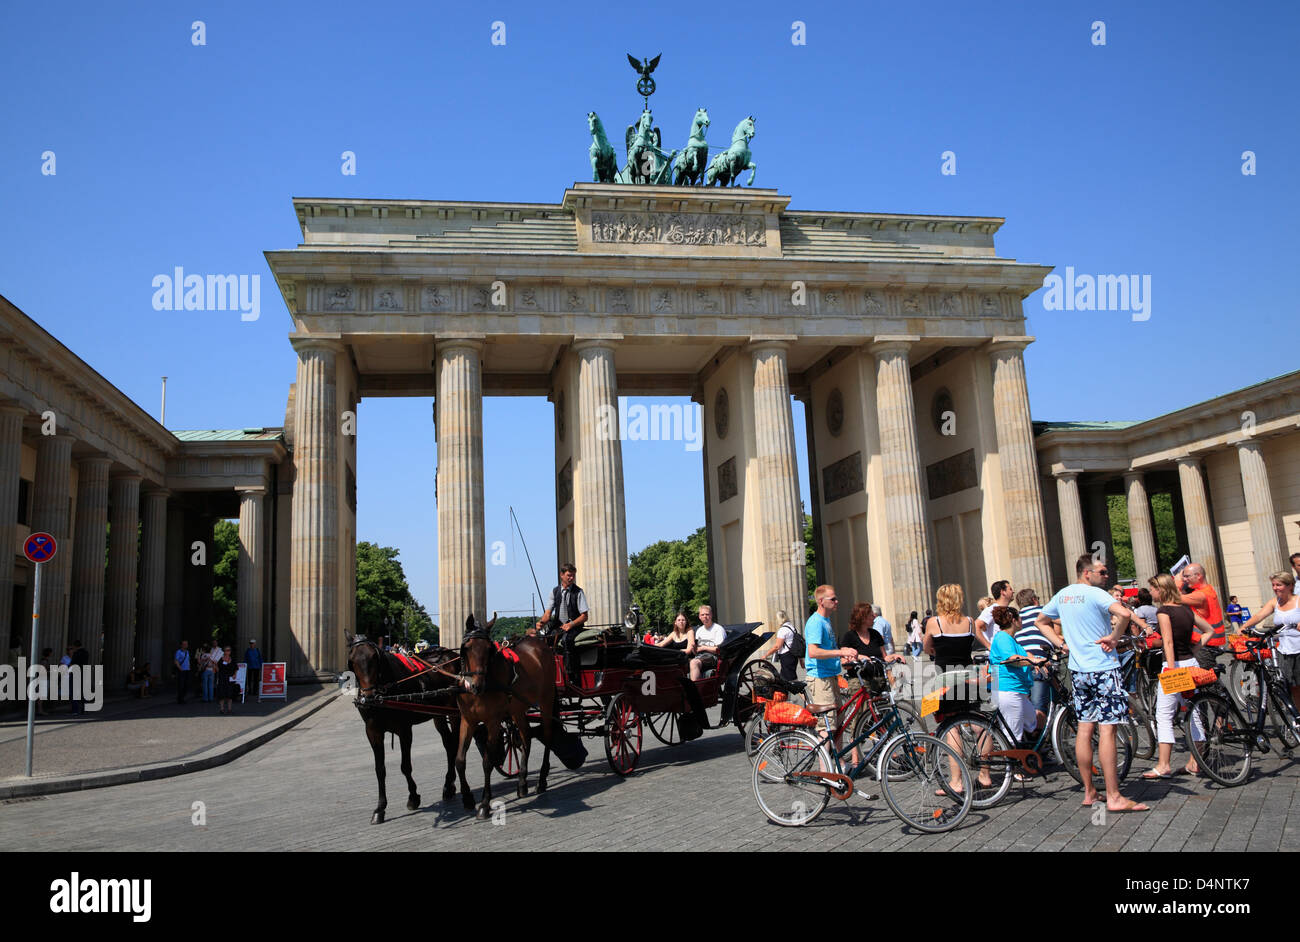 Brandenburg Gate, Brandenburger Tor, guideded bicycle tour stops in front of the gate, Berlin, Germany Stock Photo